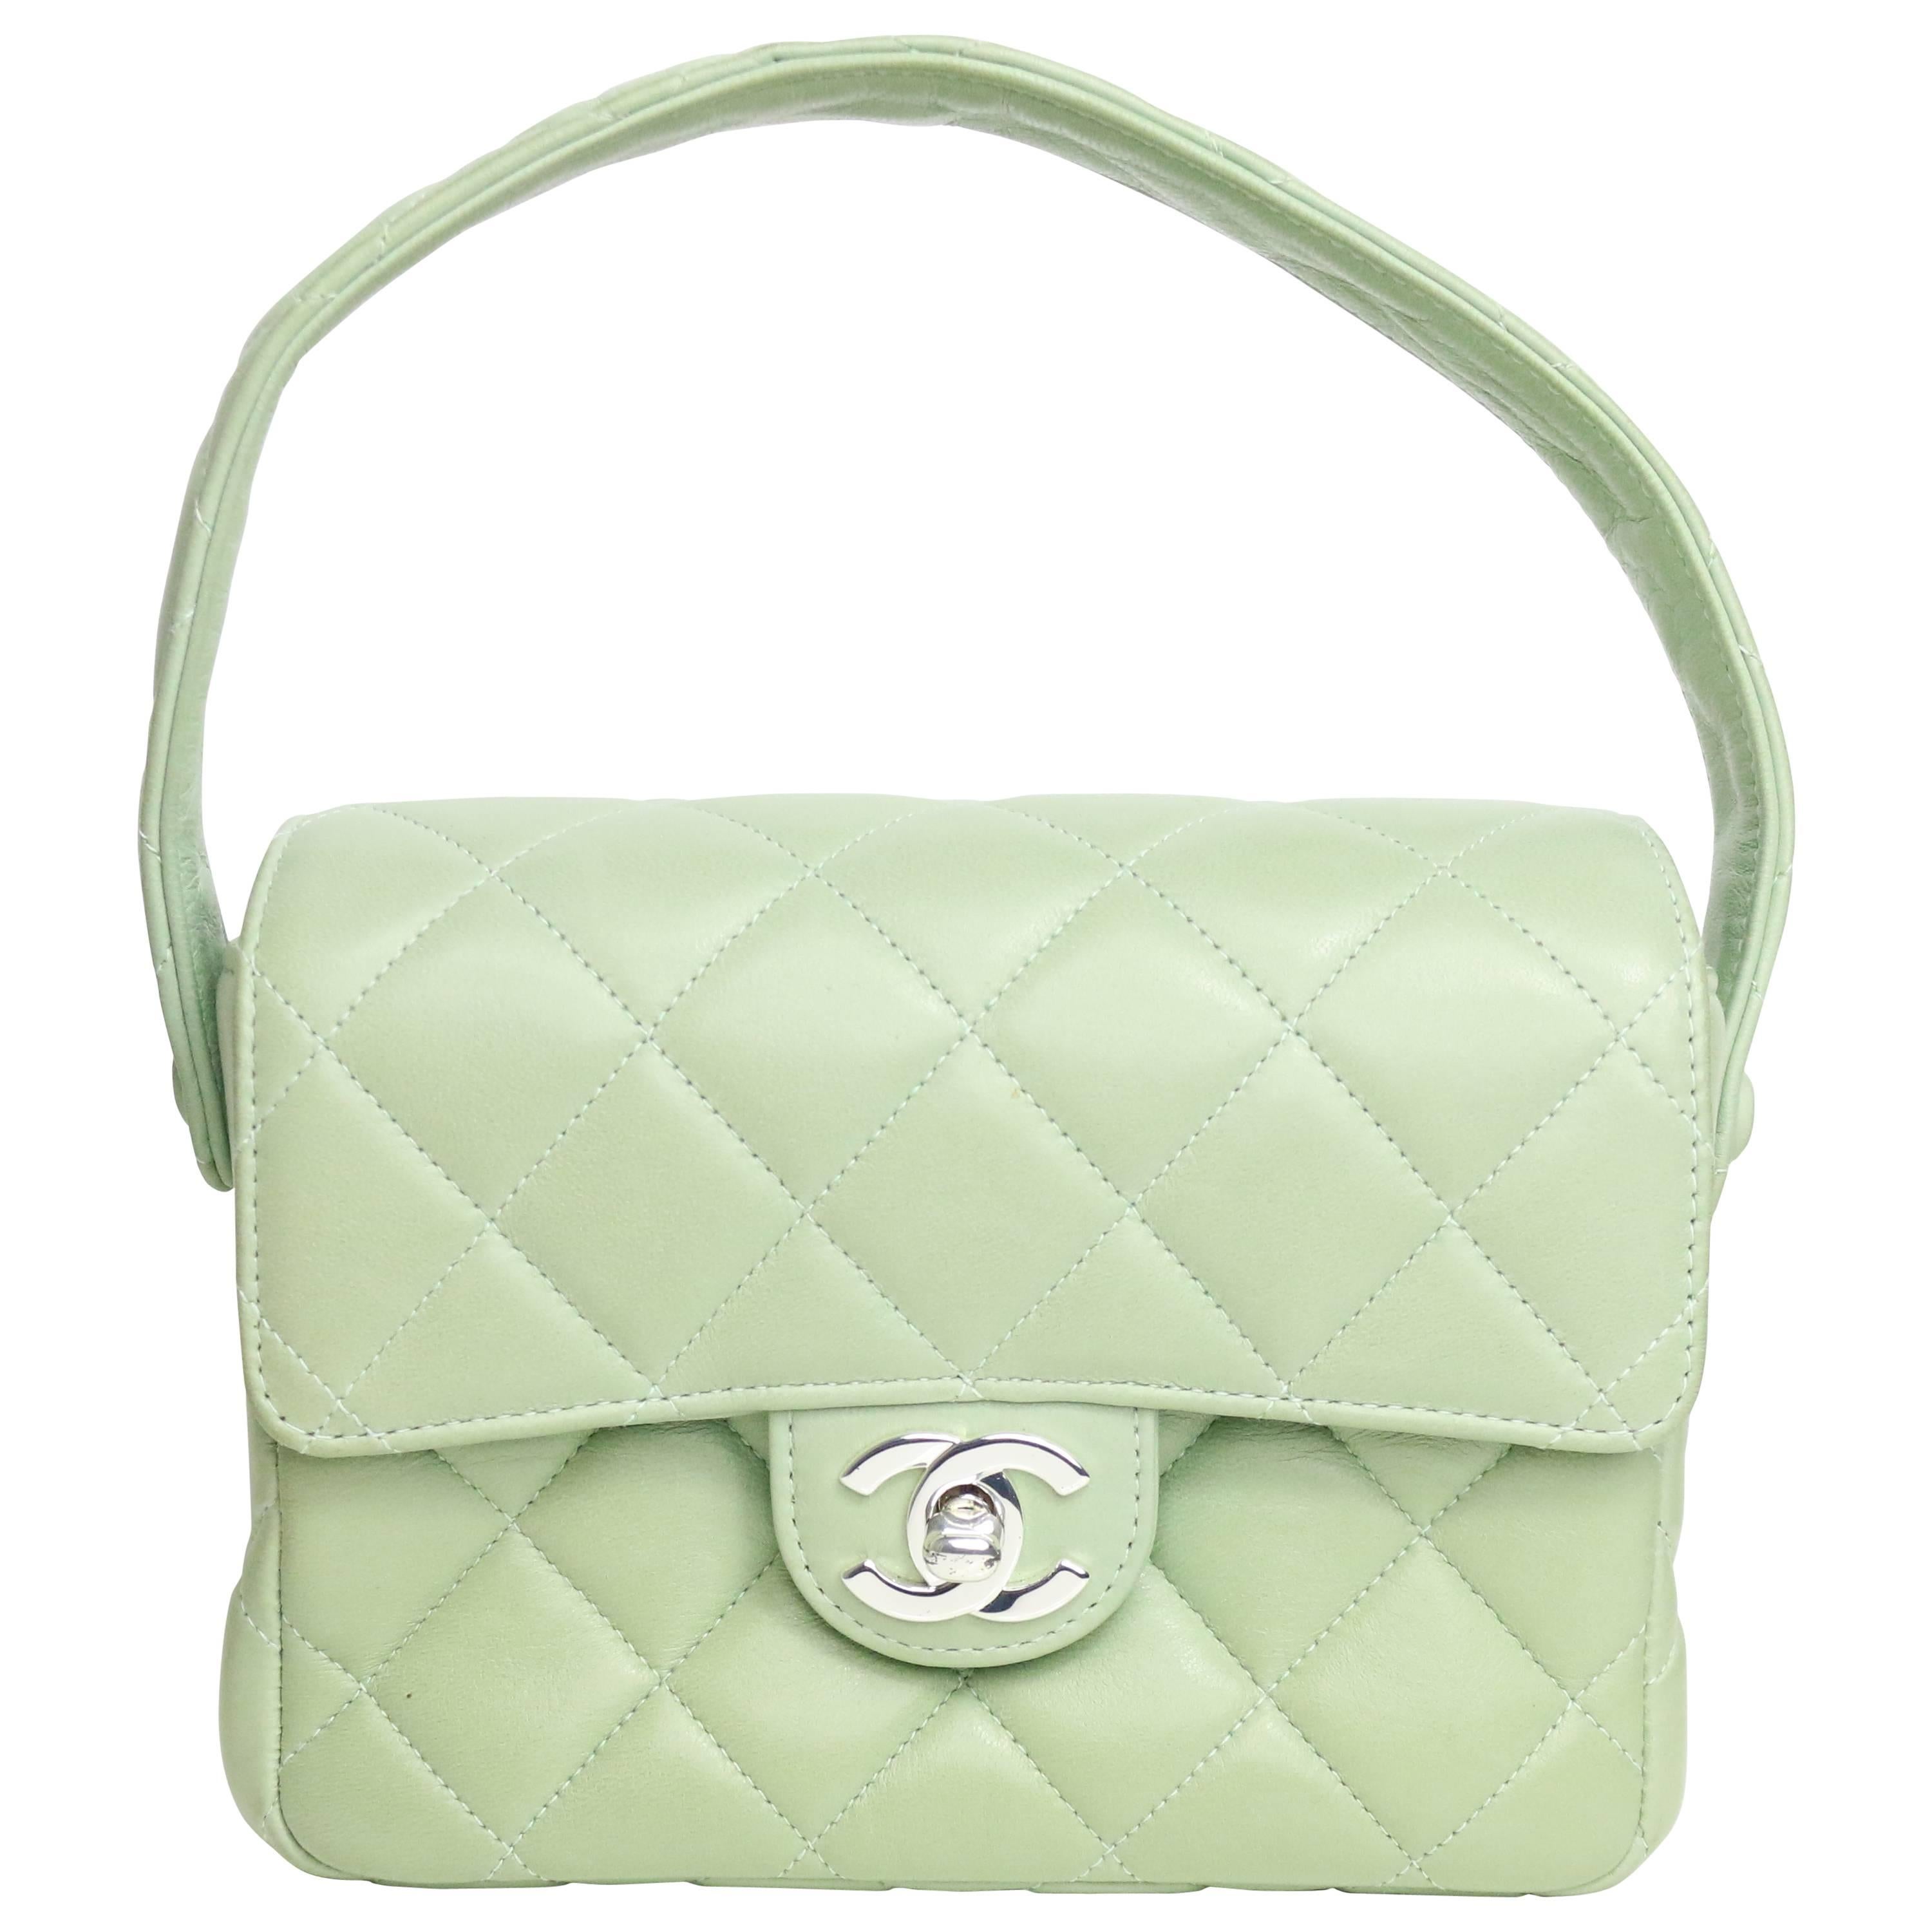 Chanel Green Lambskin Leather Quilted Mini Flap Handbag